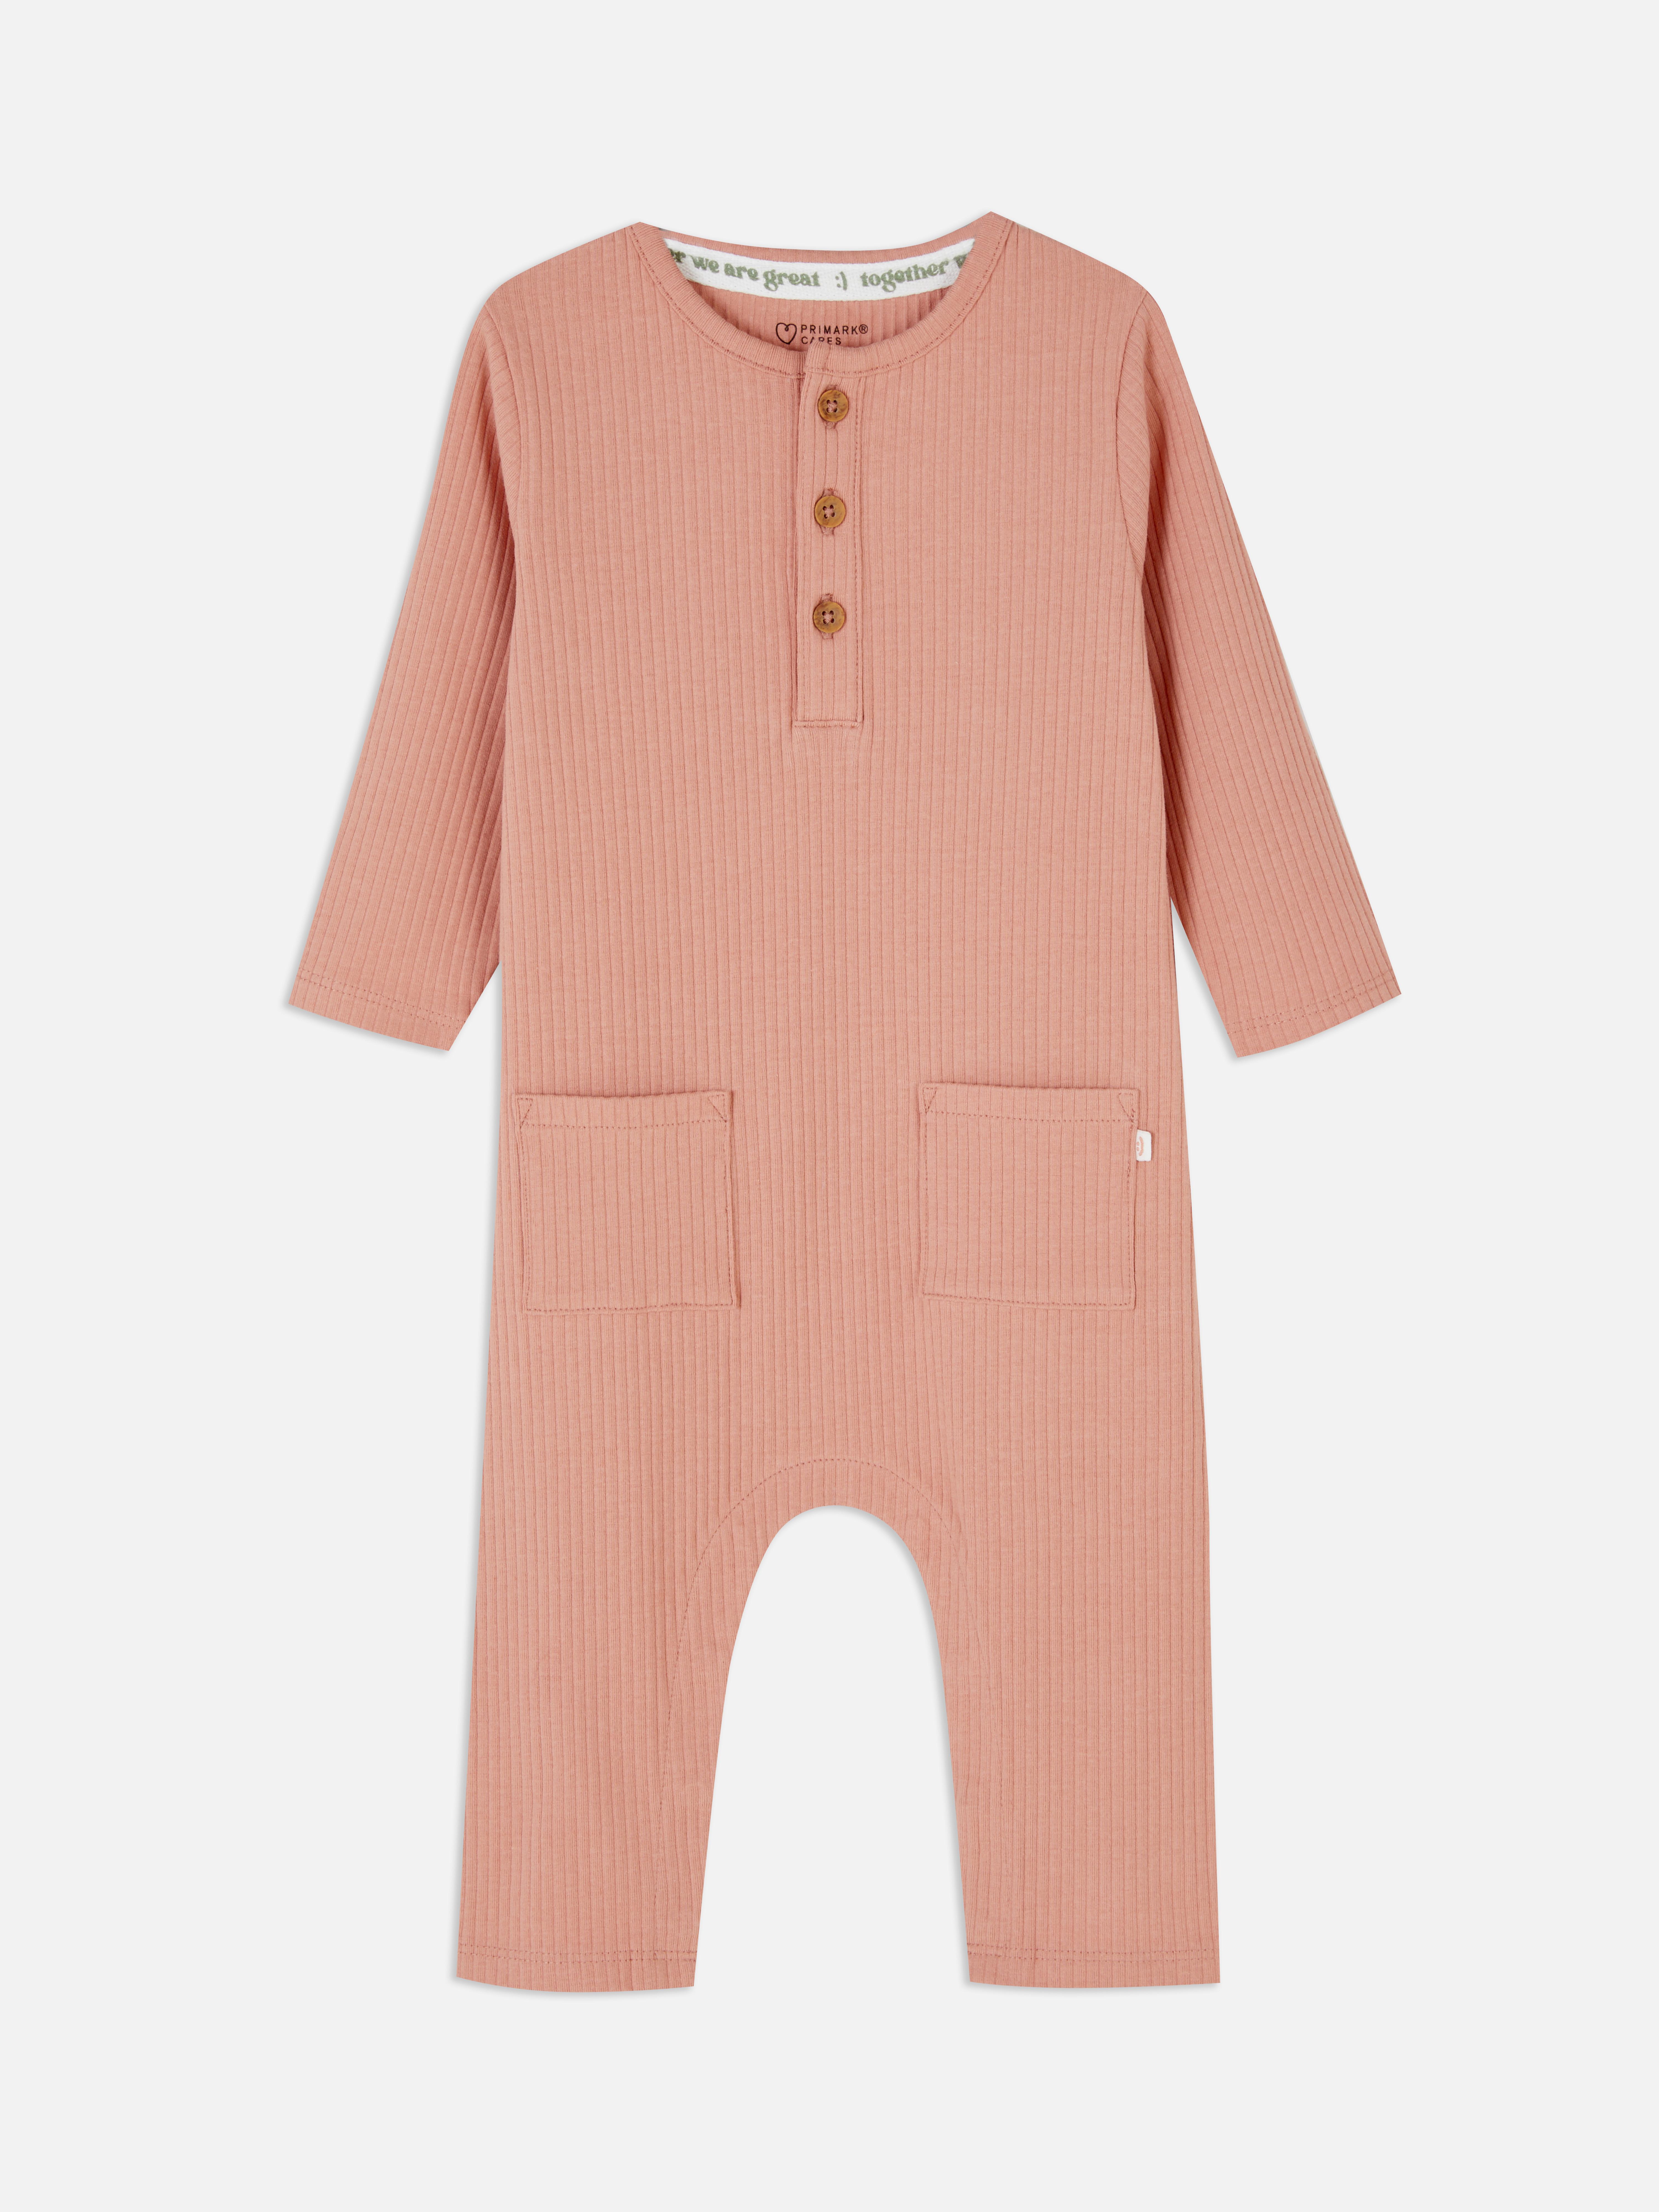 Stacey Solomon Ribbed Romper